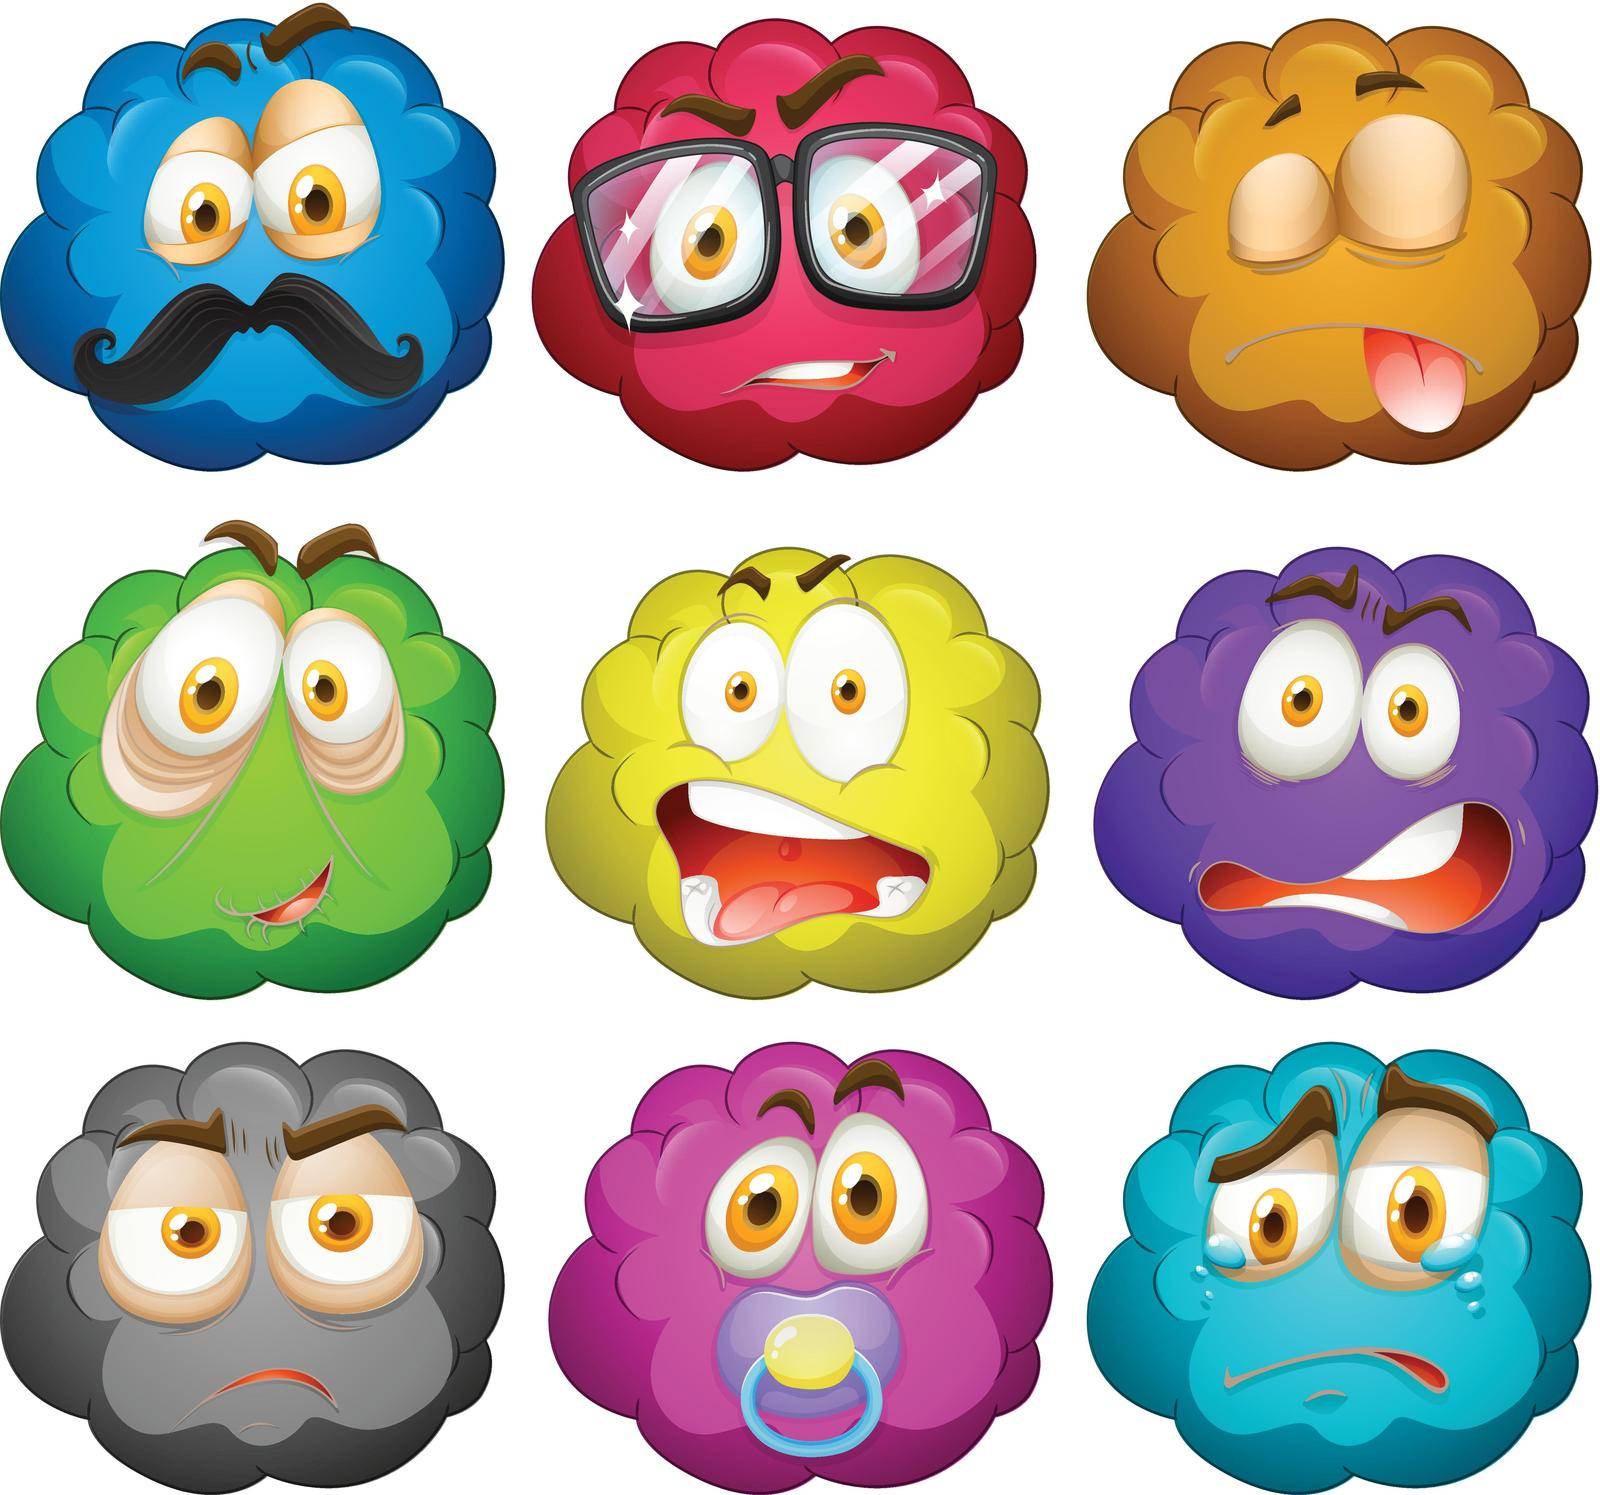 Facial expressions on fluffy balls by iimages